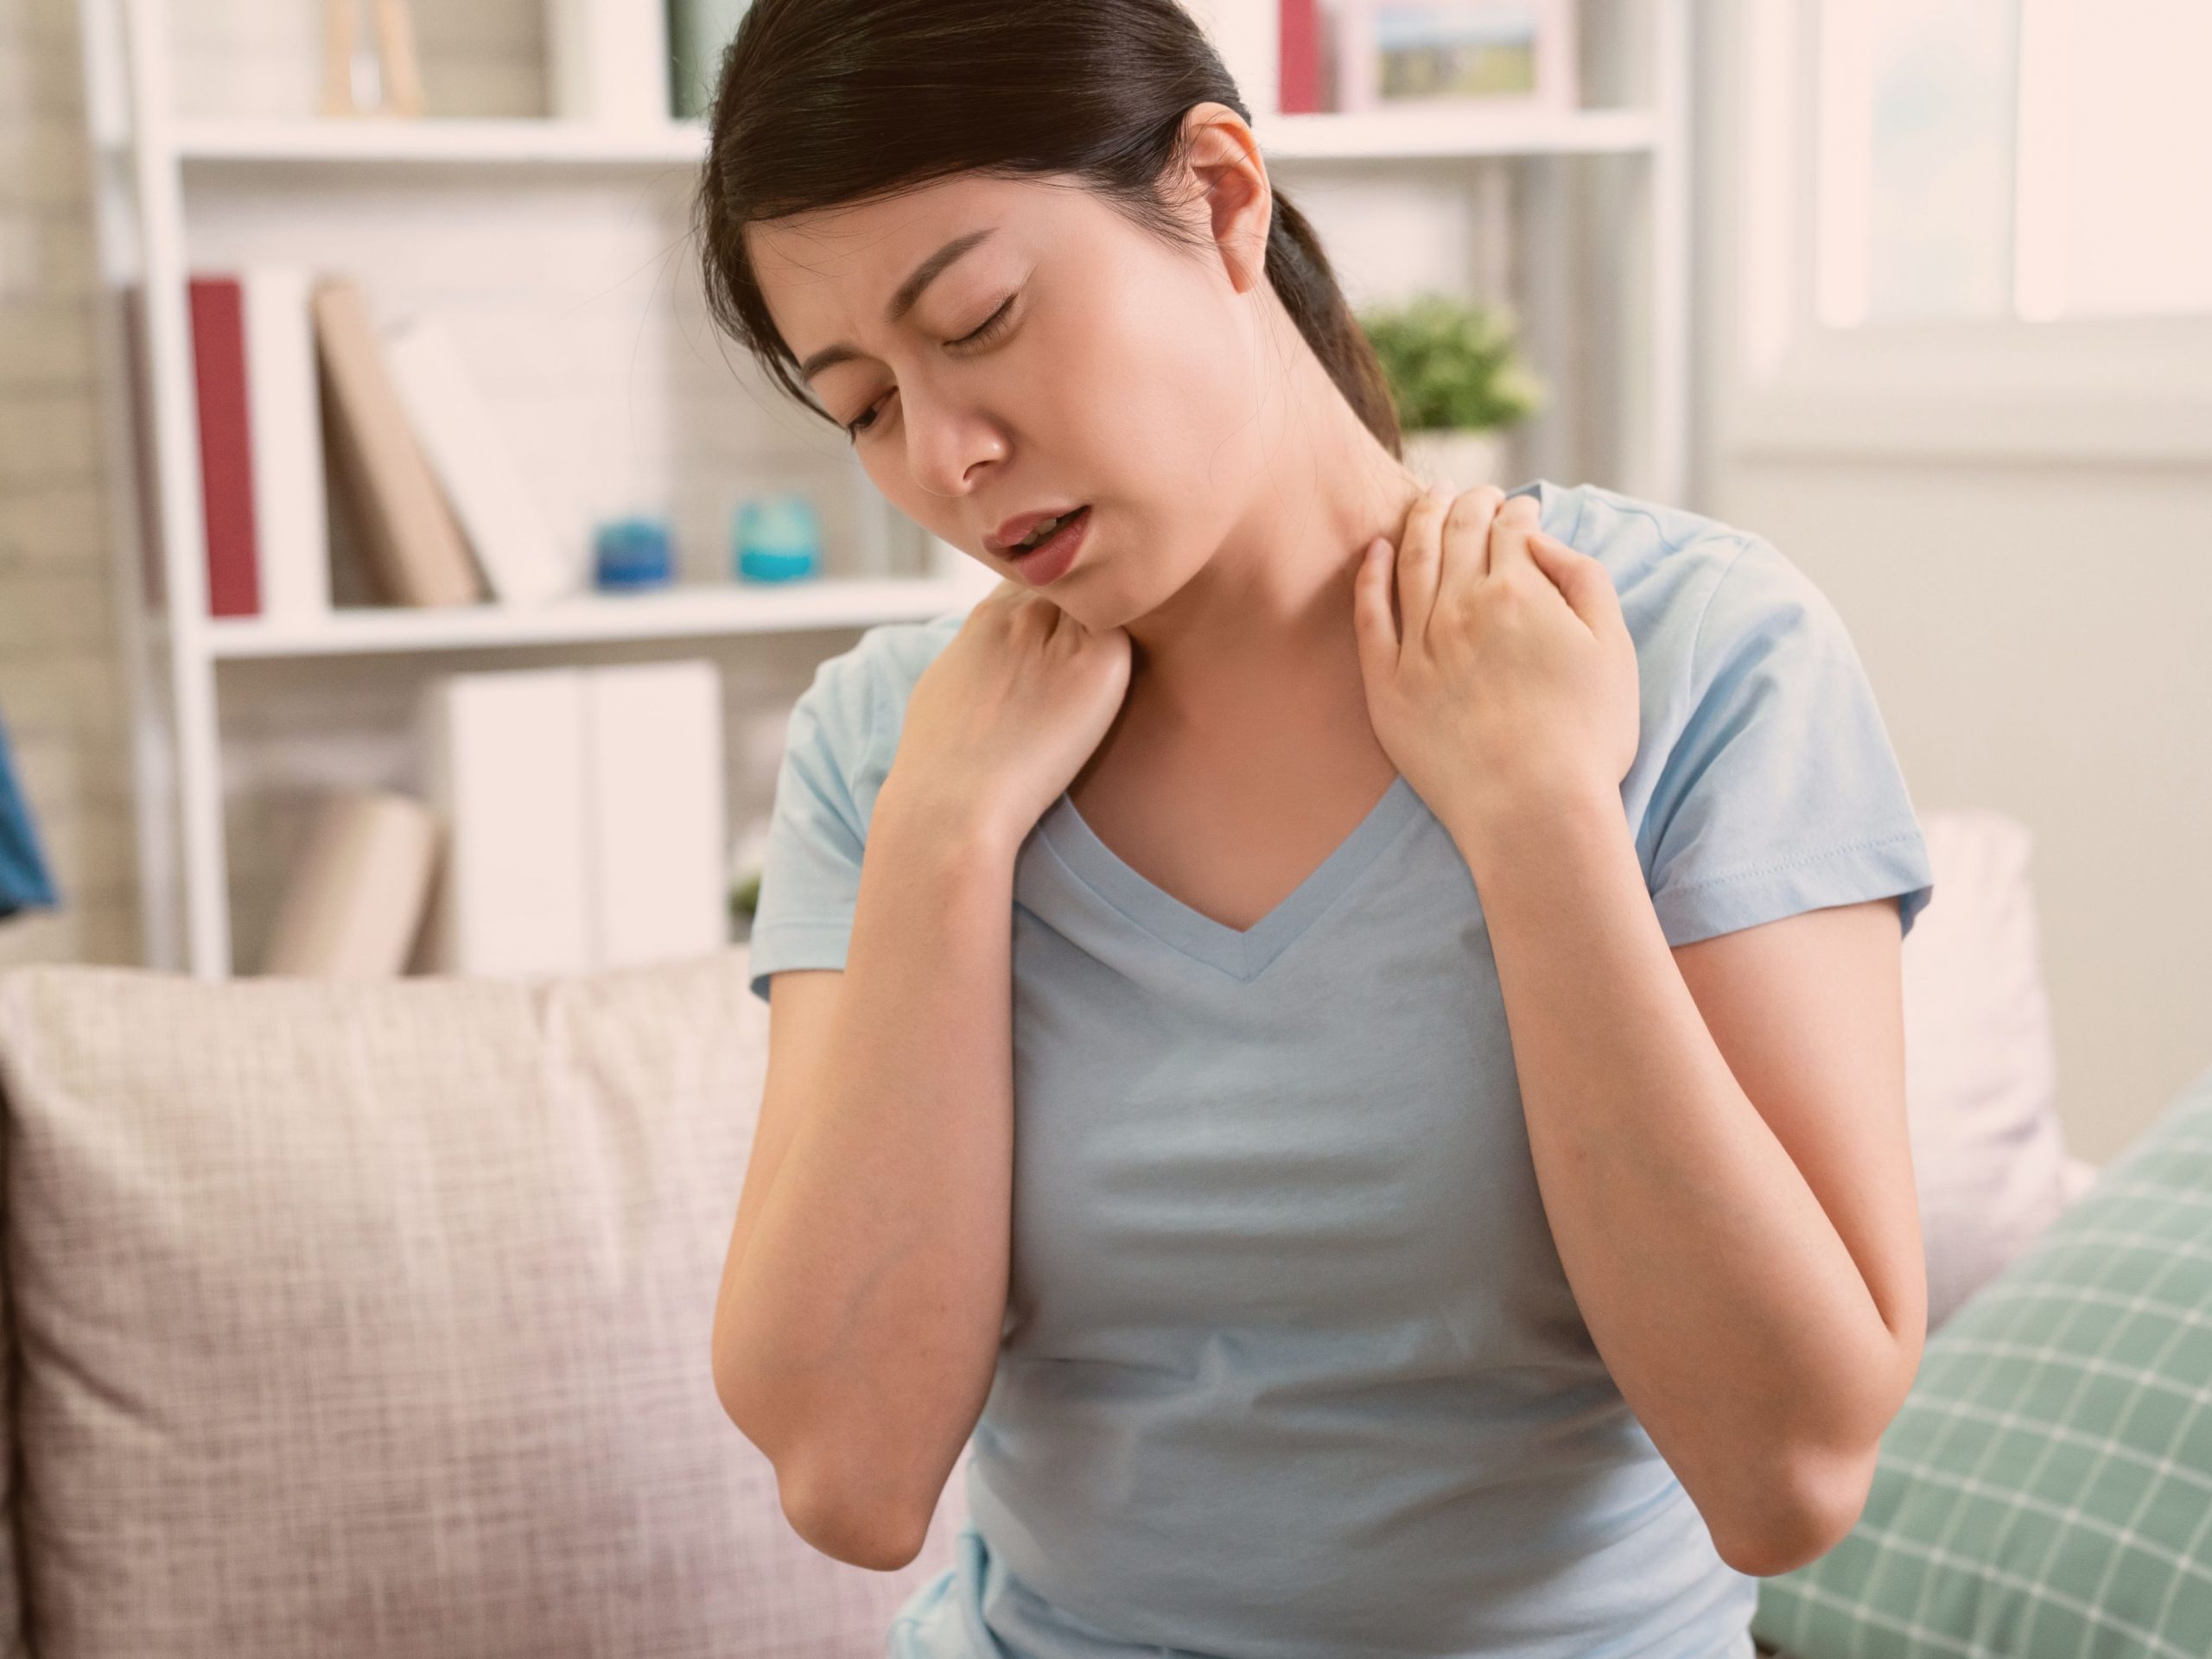 How Can Sports Massage Help with Neck and Shoulder Pain?